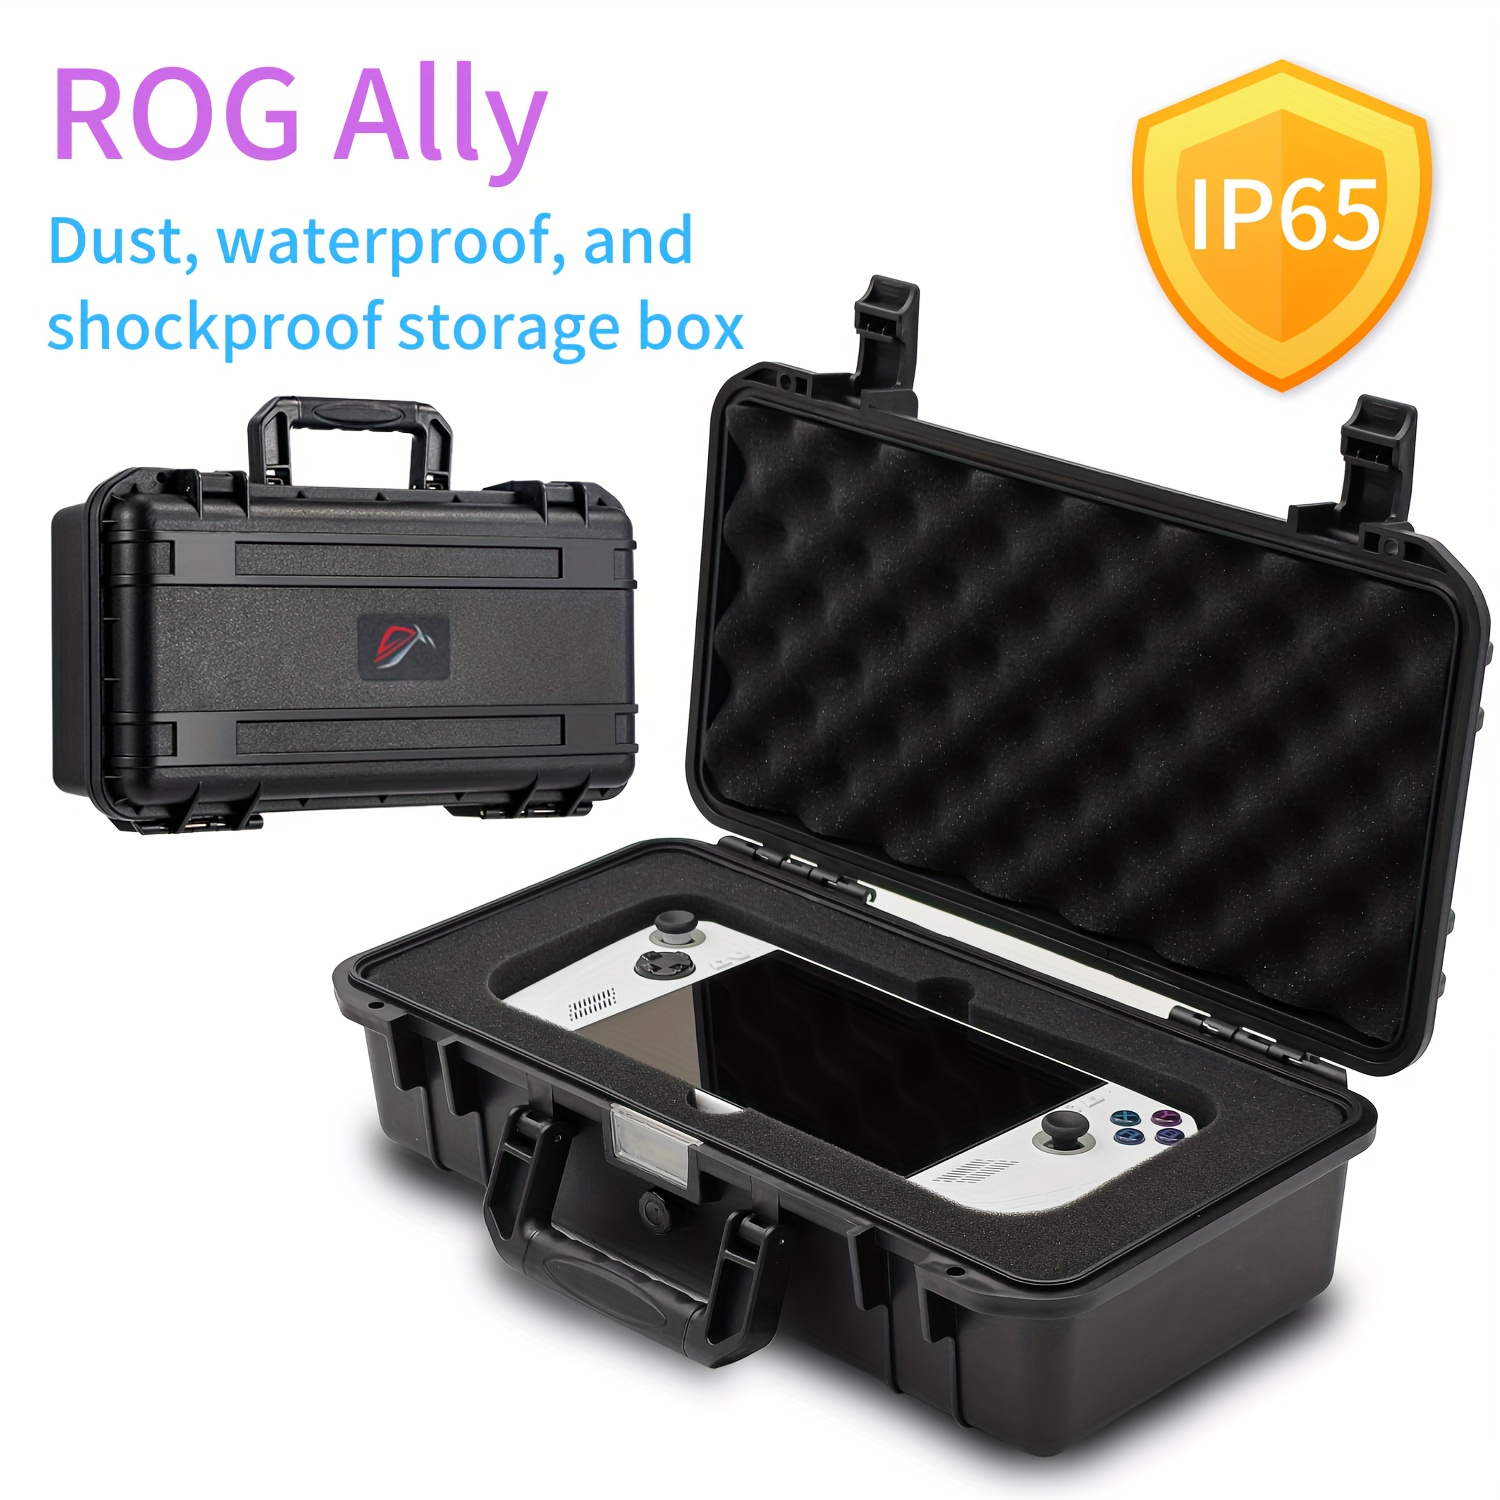 Carrying Bag Case For ROG Ally, Hard Professional Waterproof ROG Ally  Carrying Case For ROG Ally, Controllers, Foldable Keyboard & Other  Accessories A